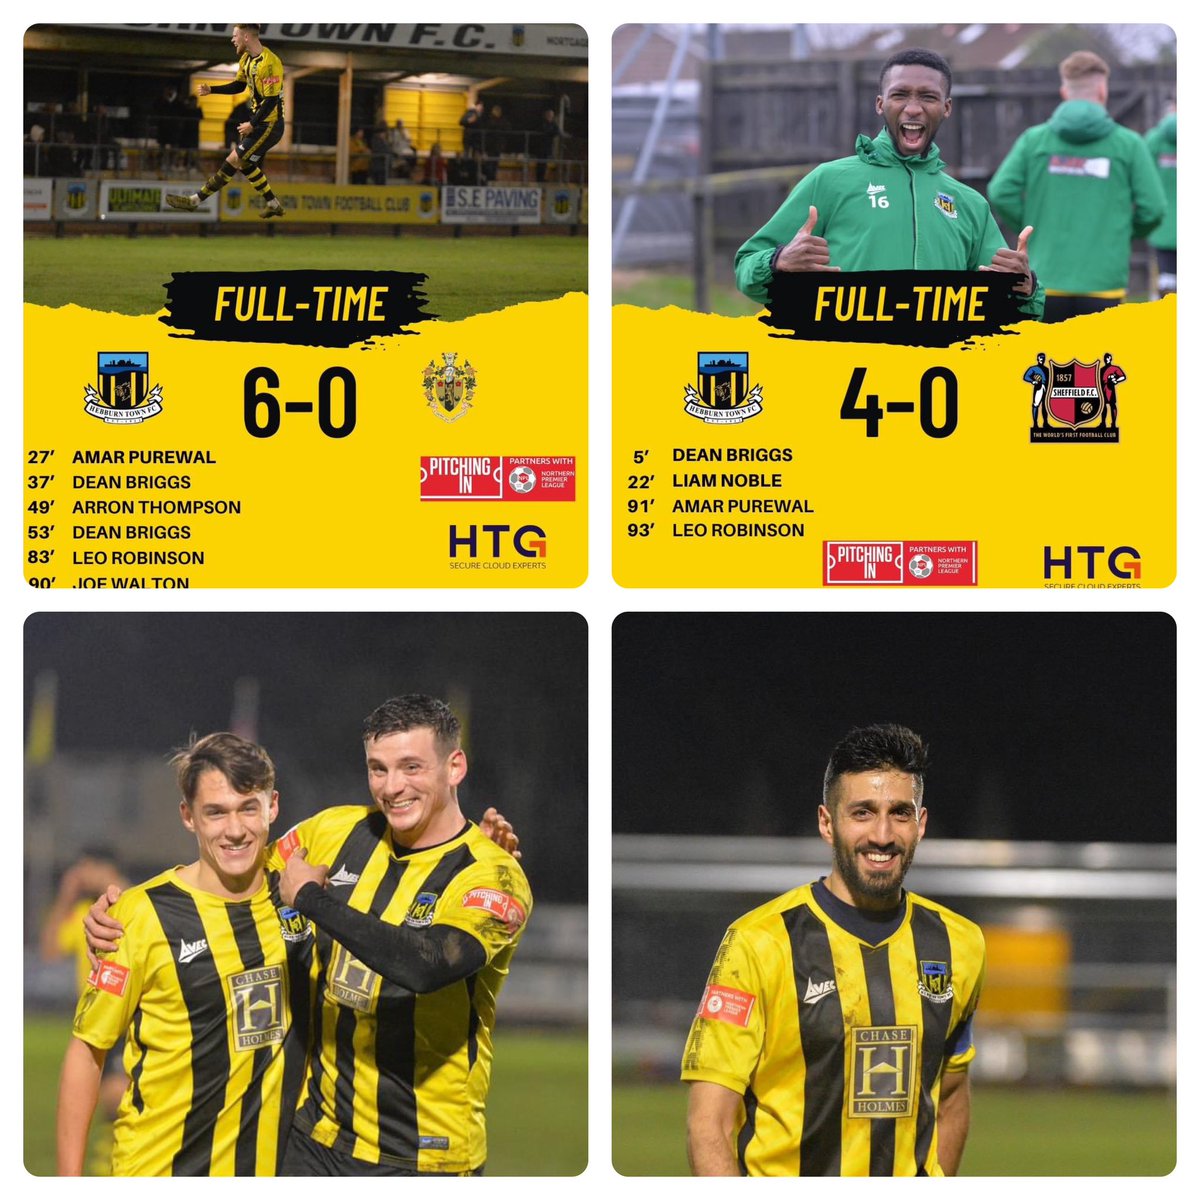 Canny week at football mind 👀 🖤💛 10 goals, 2 clean sheets, @P70AMA goes top of the @NorthernPremLge East golden boot table & young Leo Robinson scores 3 in 3 alongside some outstanding performances from every single player 👏👏👏